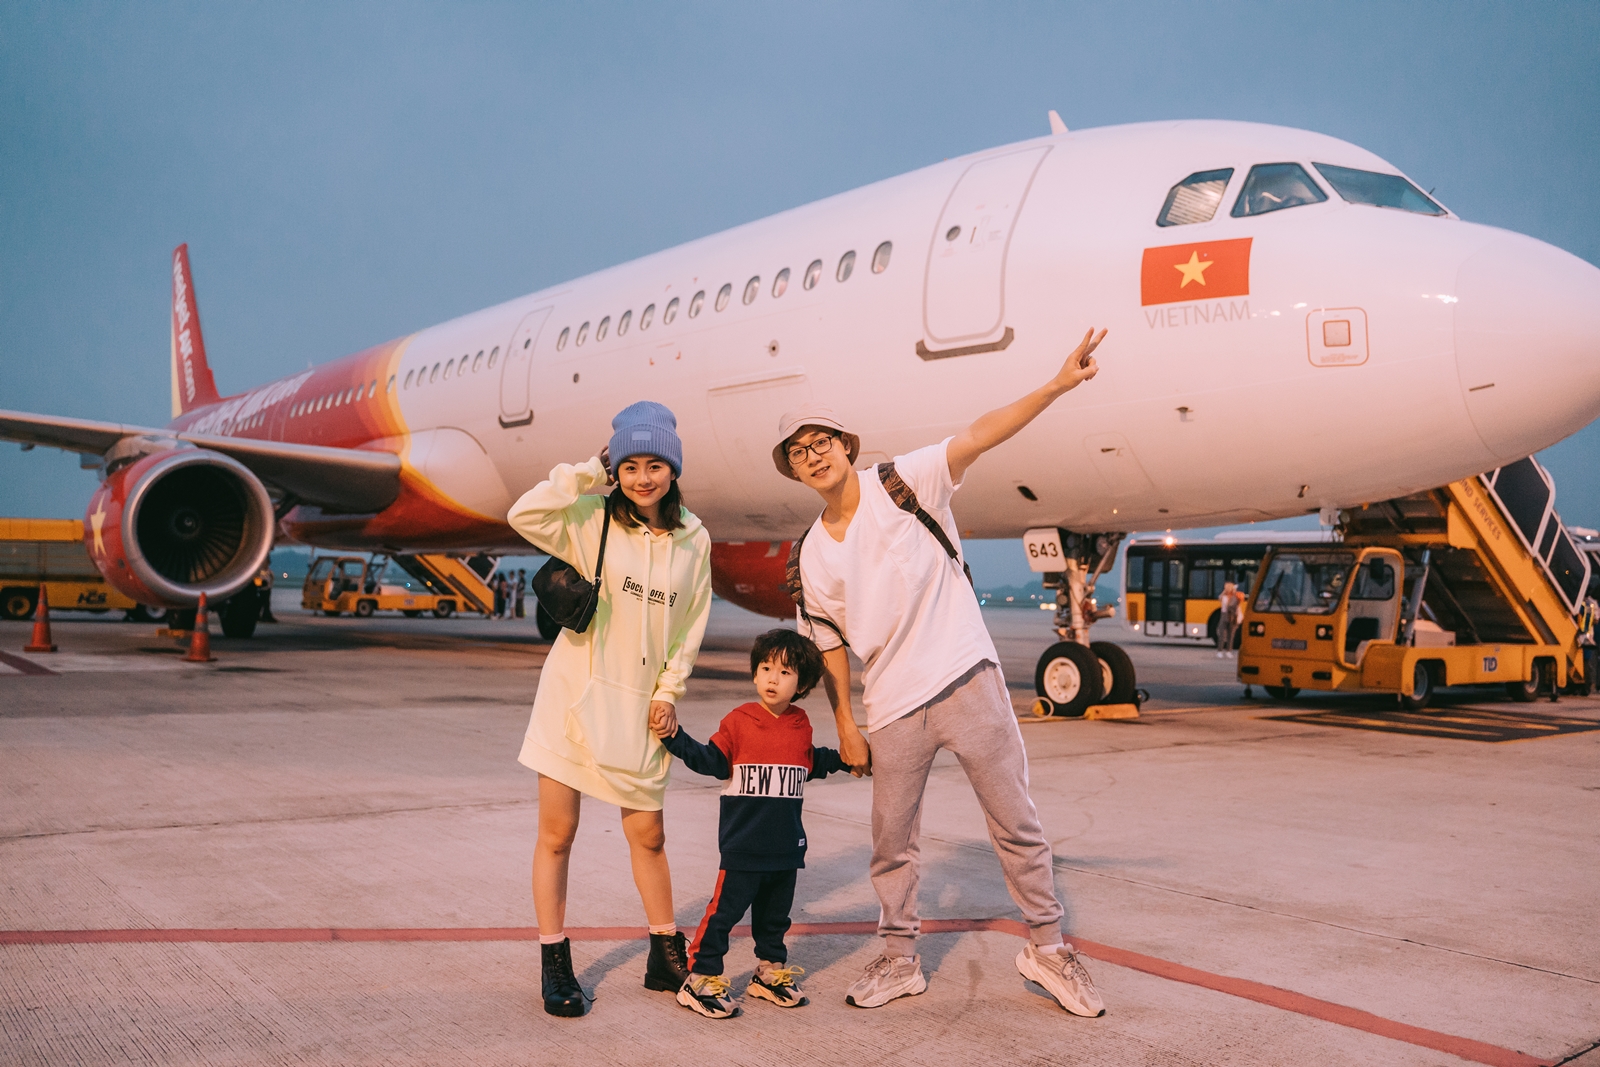 Vietnam’s no-frills airline offers super-promotional tickets to celebrate Int’l Children’s Day